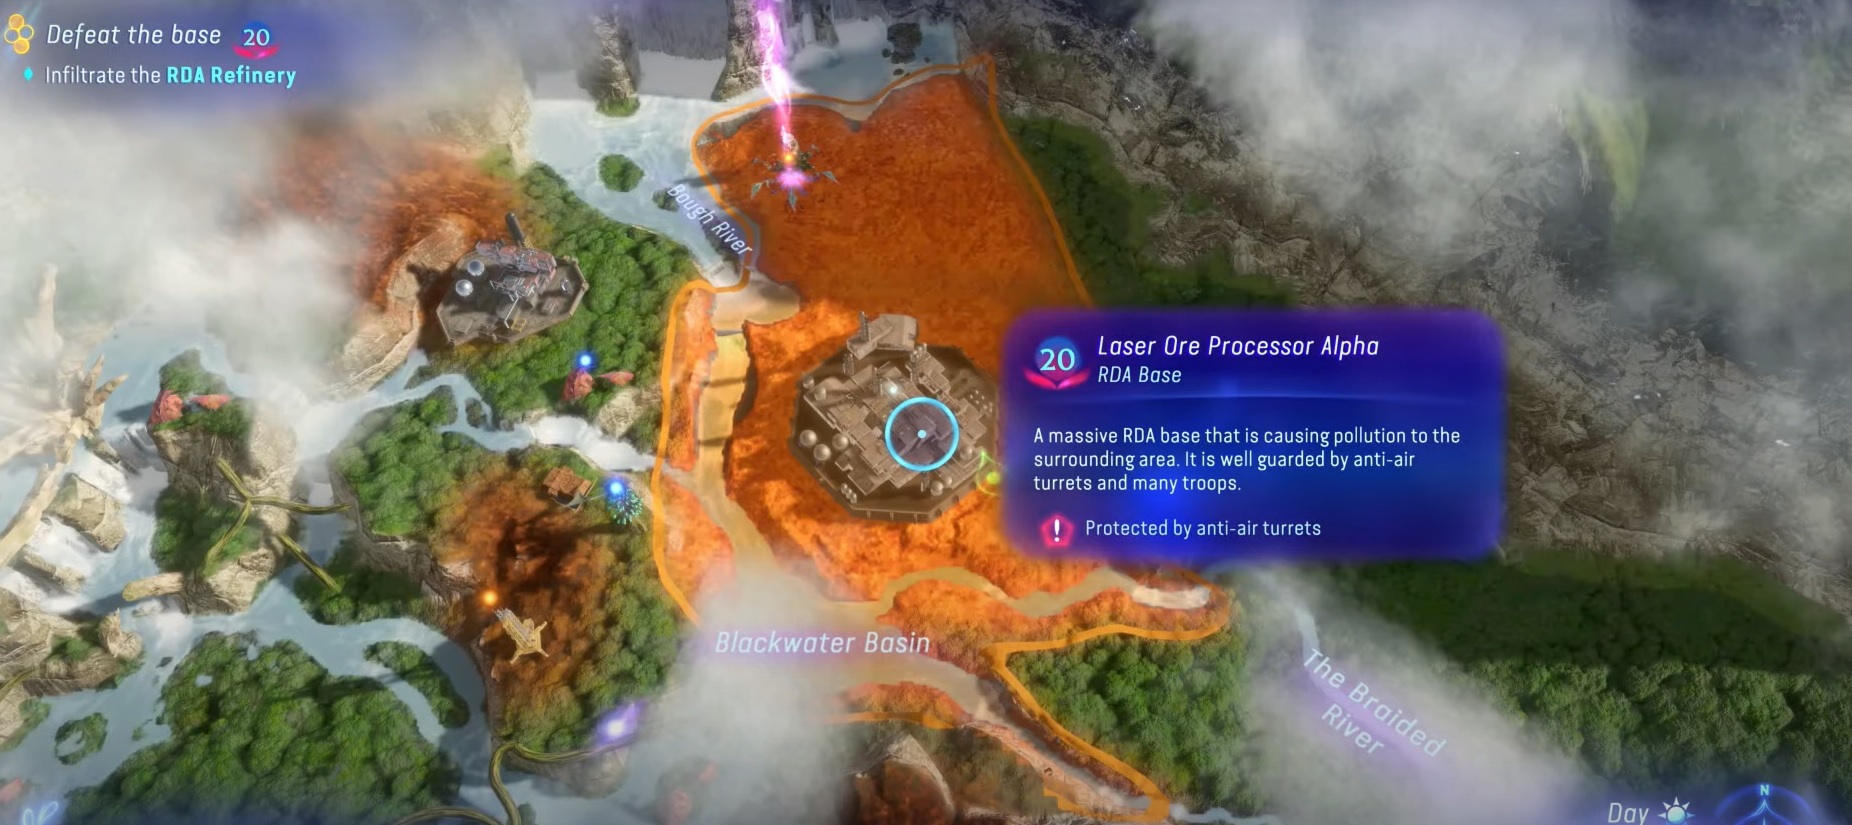 How To Complete The Laser Ore Processor Alpha in Avatar: Frontiers of Pandora